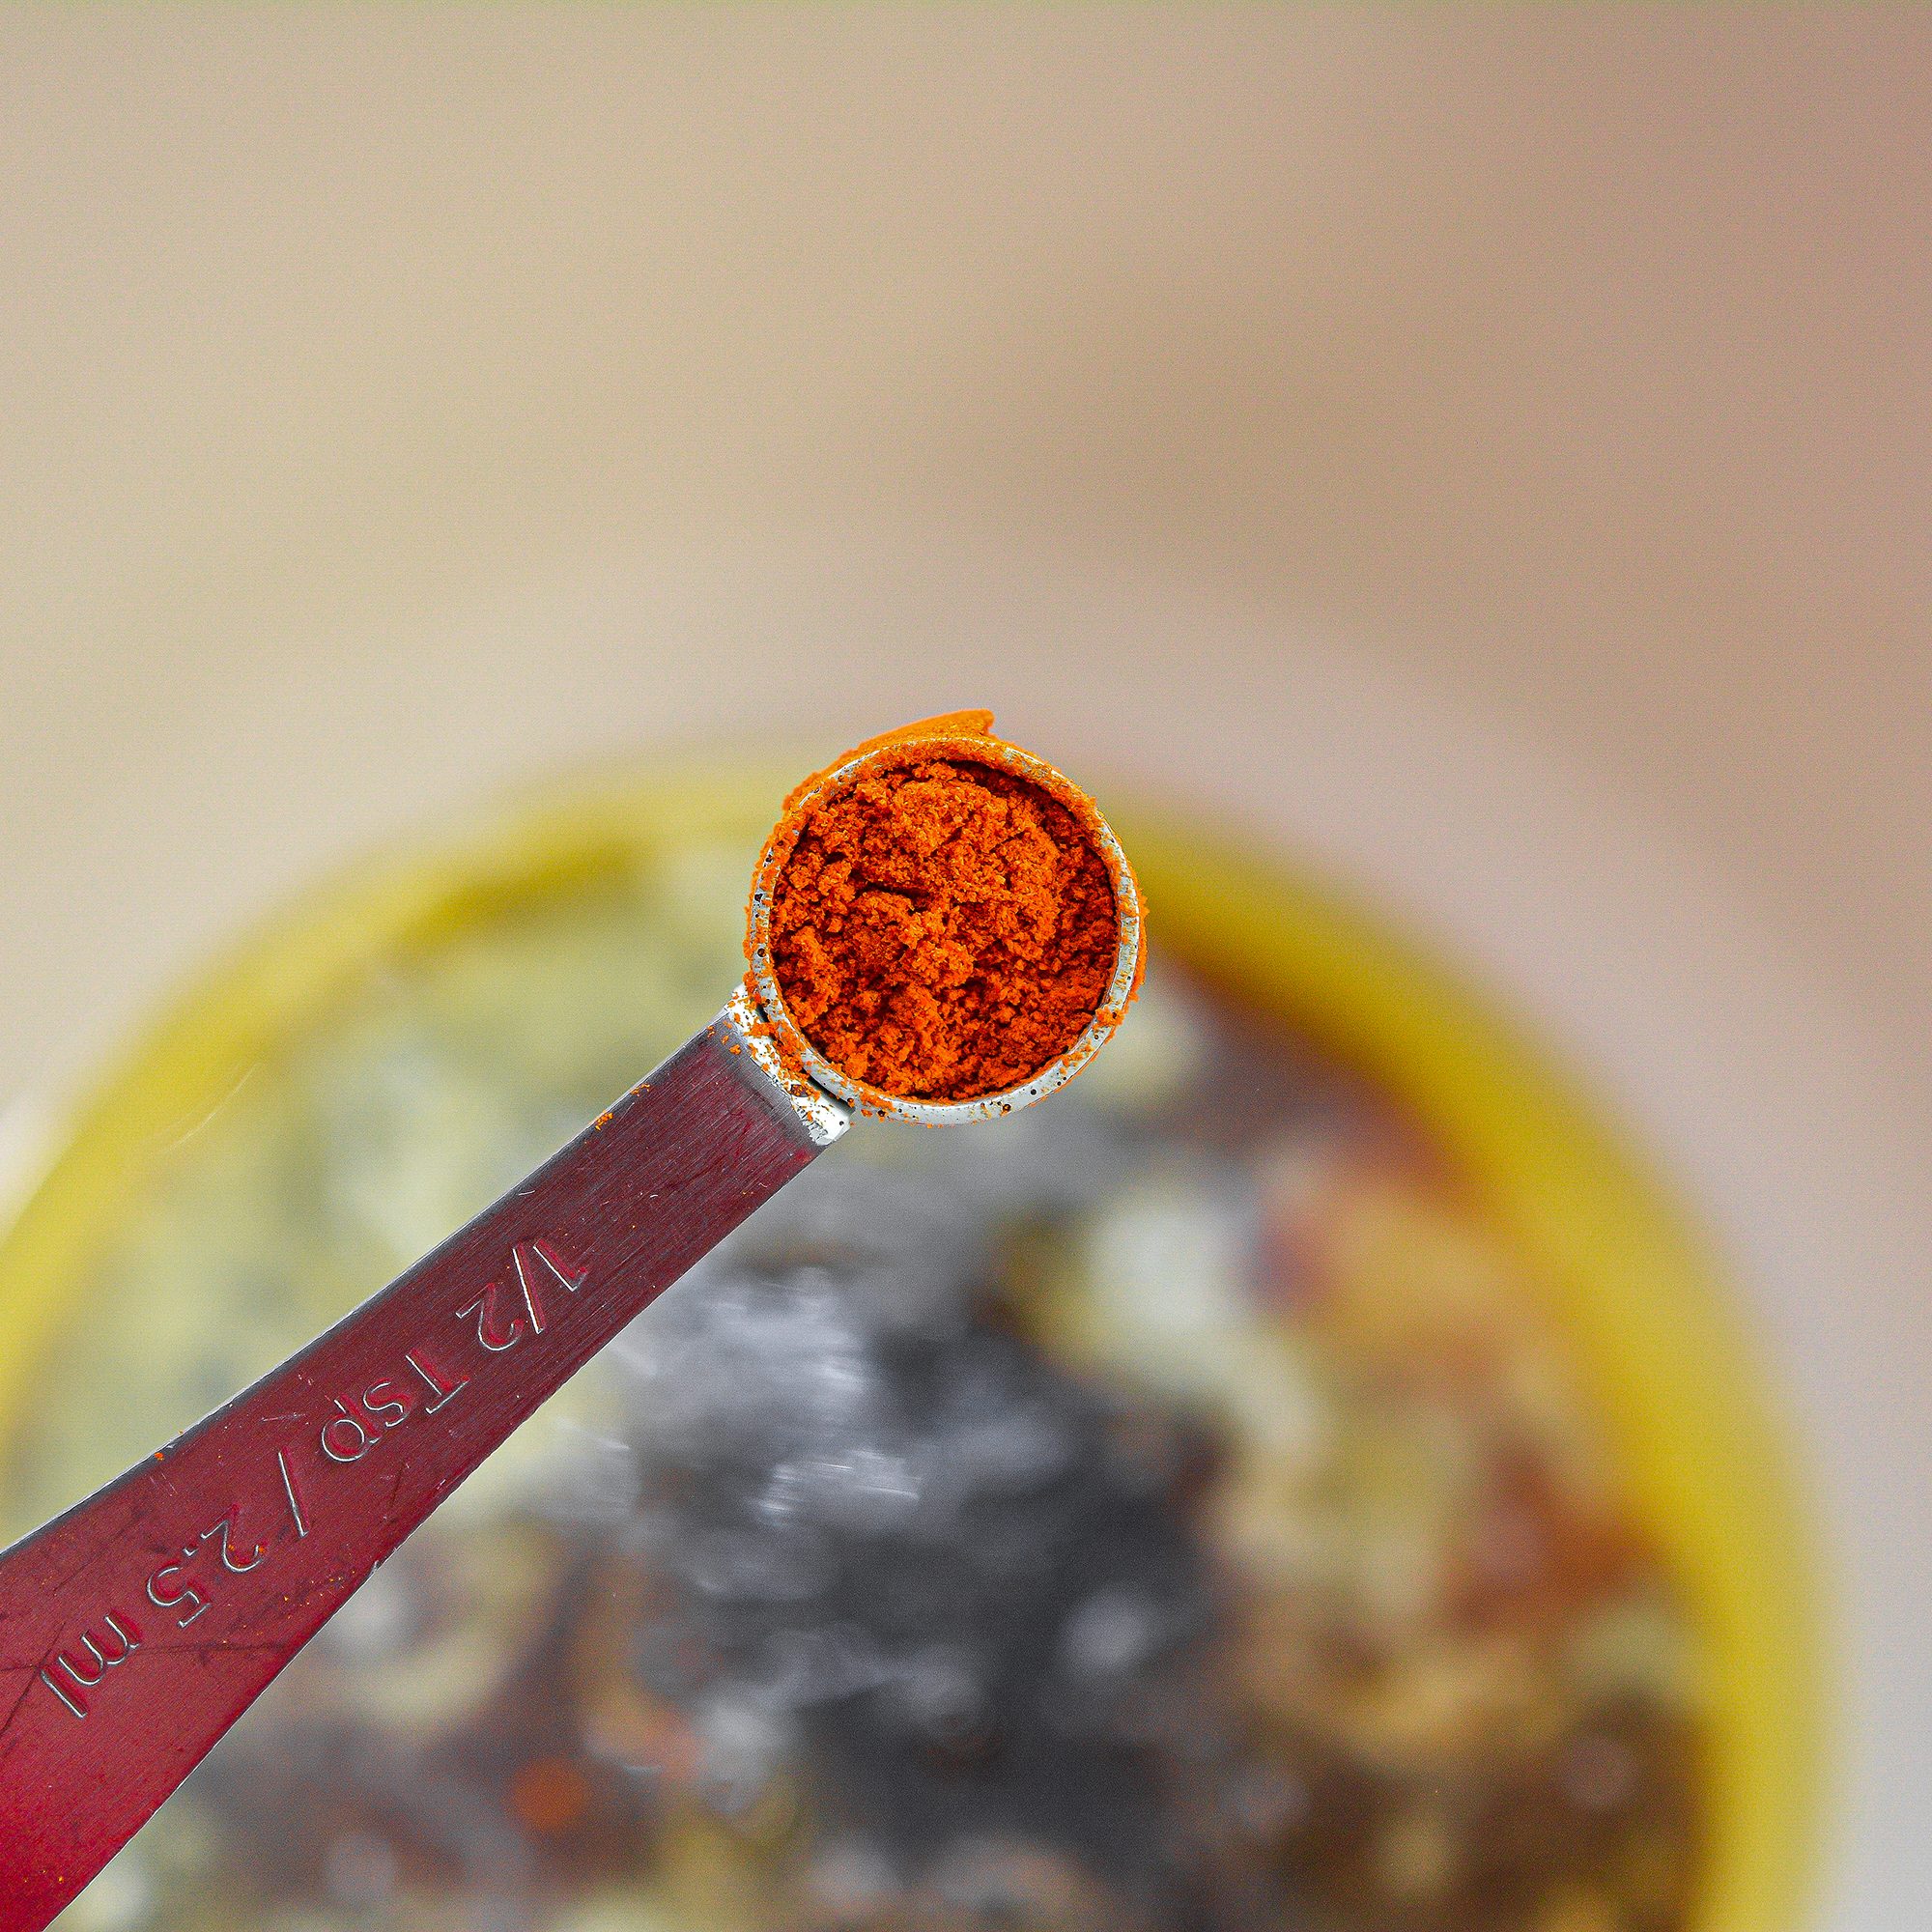 In a bowl, whisk together the butter, maple syrup, worcestershire sauce, salt, pepper and tabasco sauce.